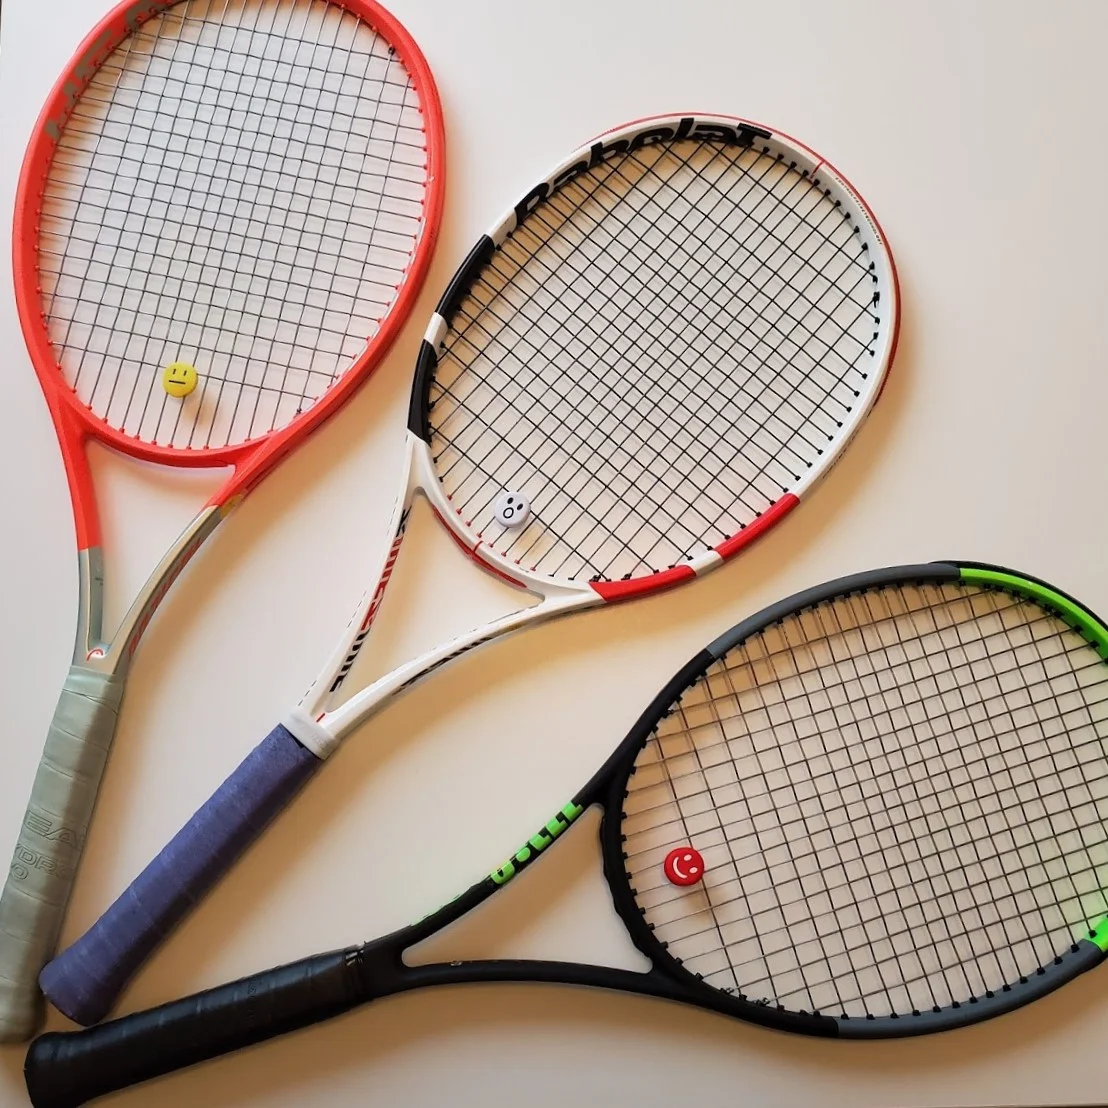 Tennis Bargains US Open Tennis Deals and Reviews Tennis Racquet Reviews for 3.5-4.5 NTRP players 98 or 100 sq in.